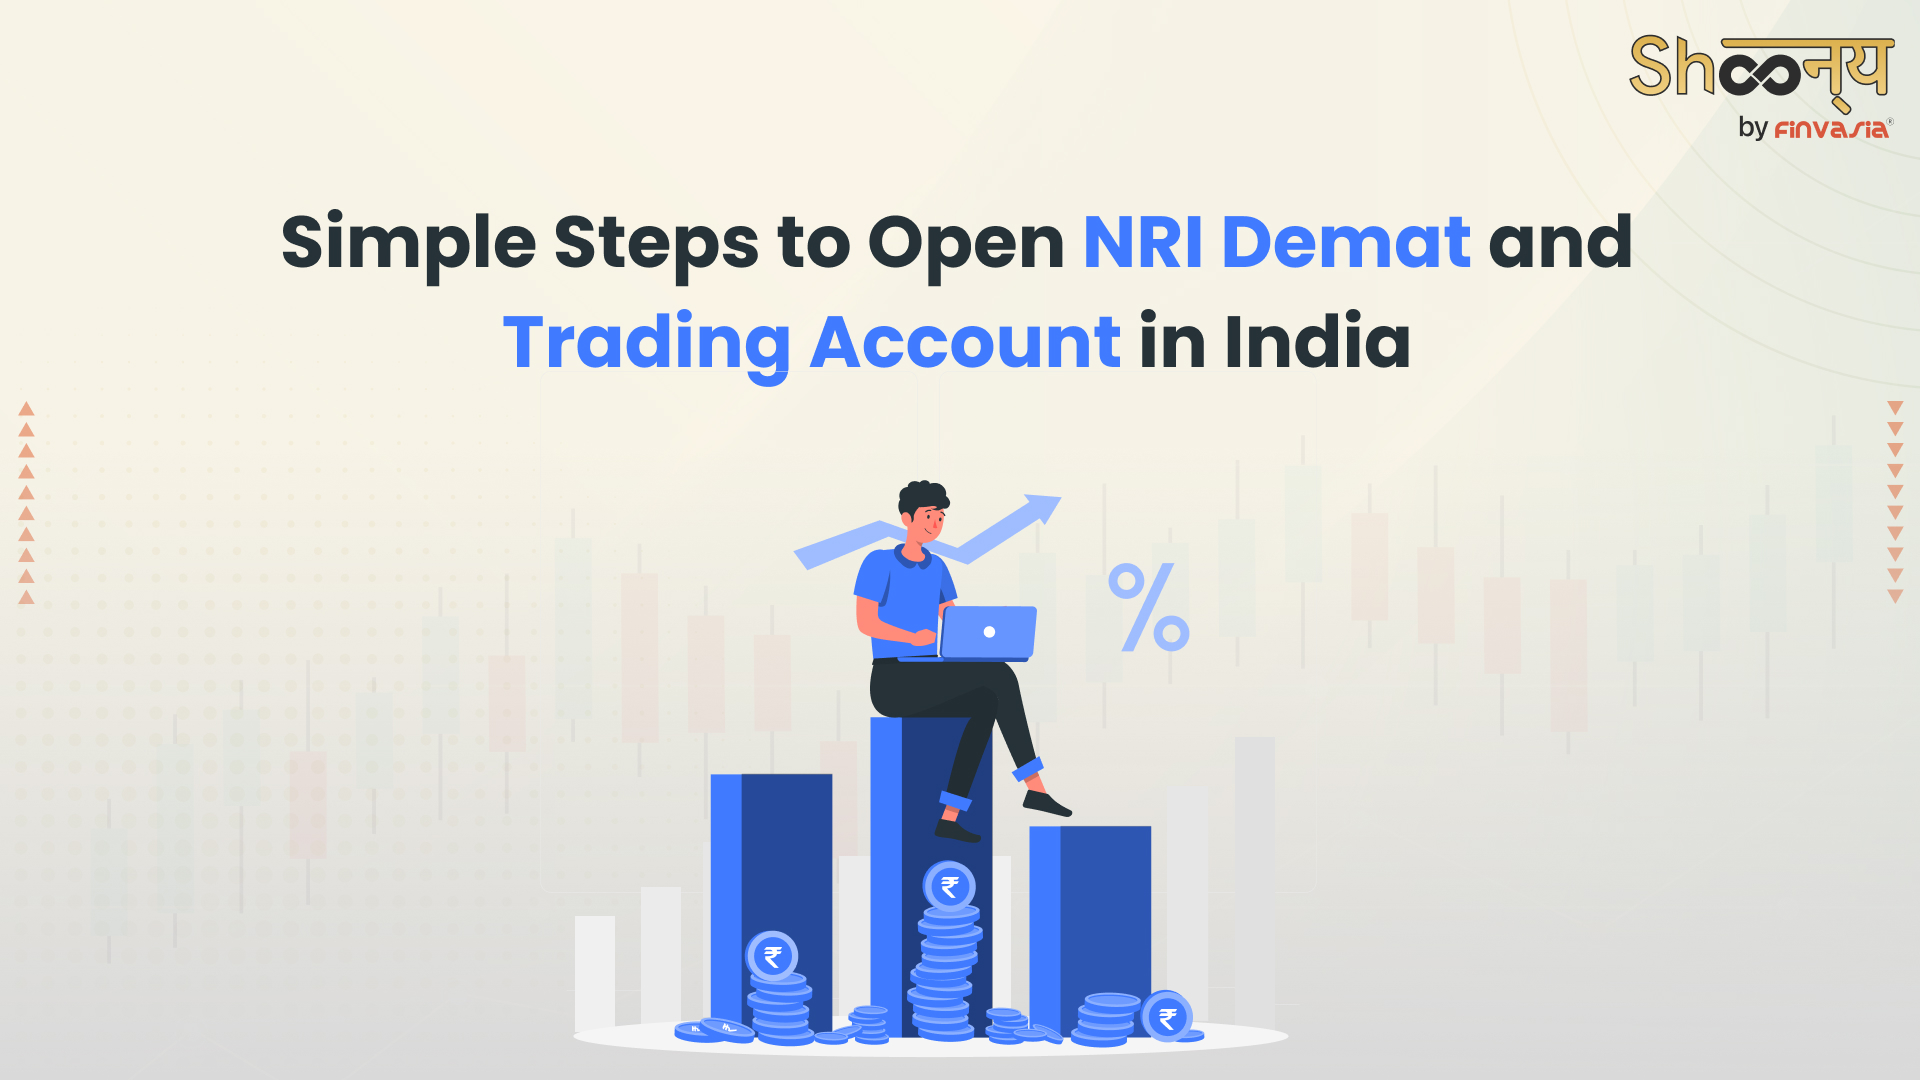 How to Open an NRI Demat and Trading Account